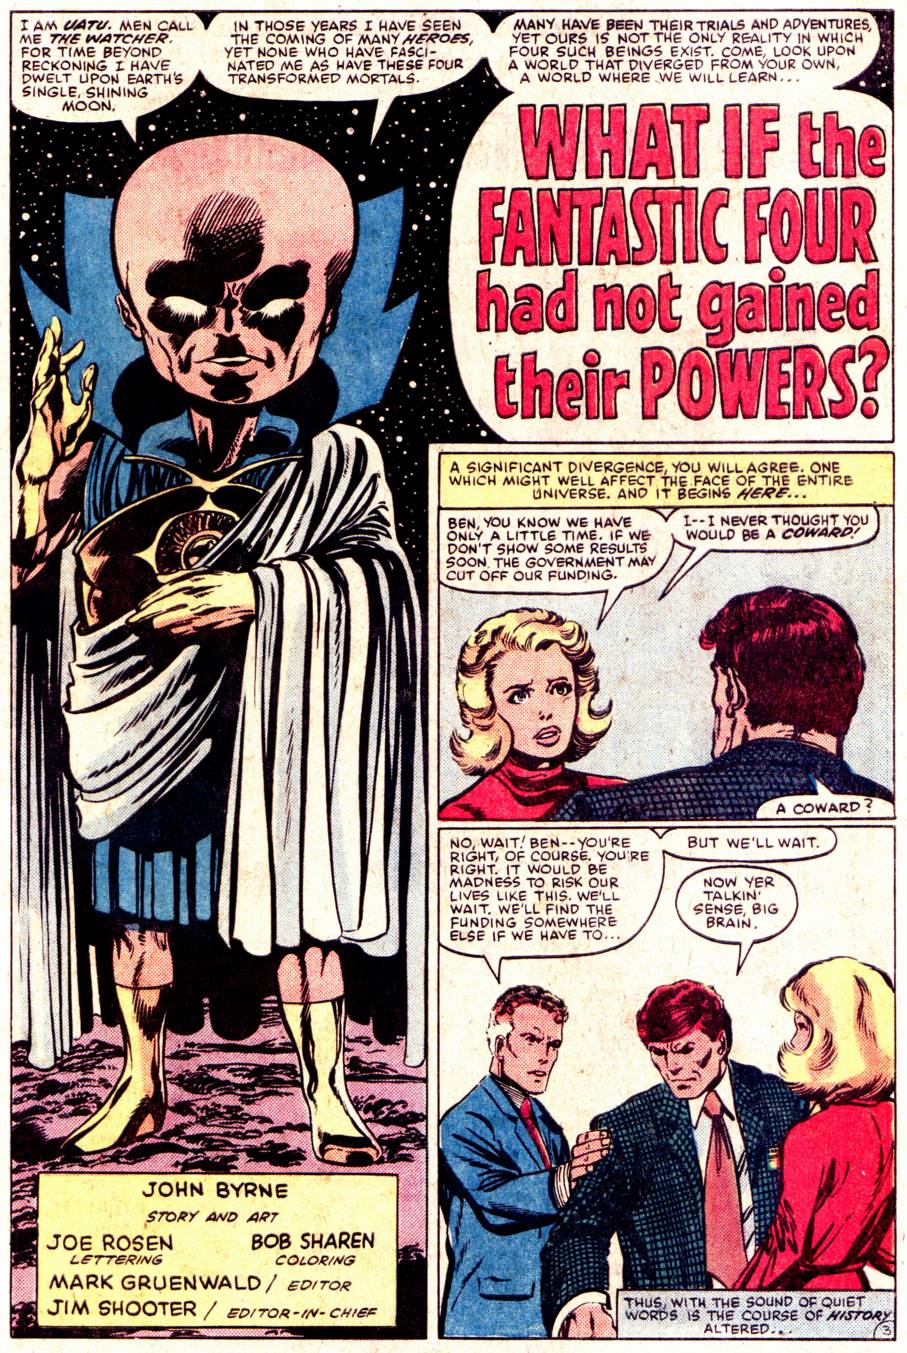 What If? (1977) issue 36 - The Fantastic Four Had Not Gained Their Powers - Page 4